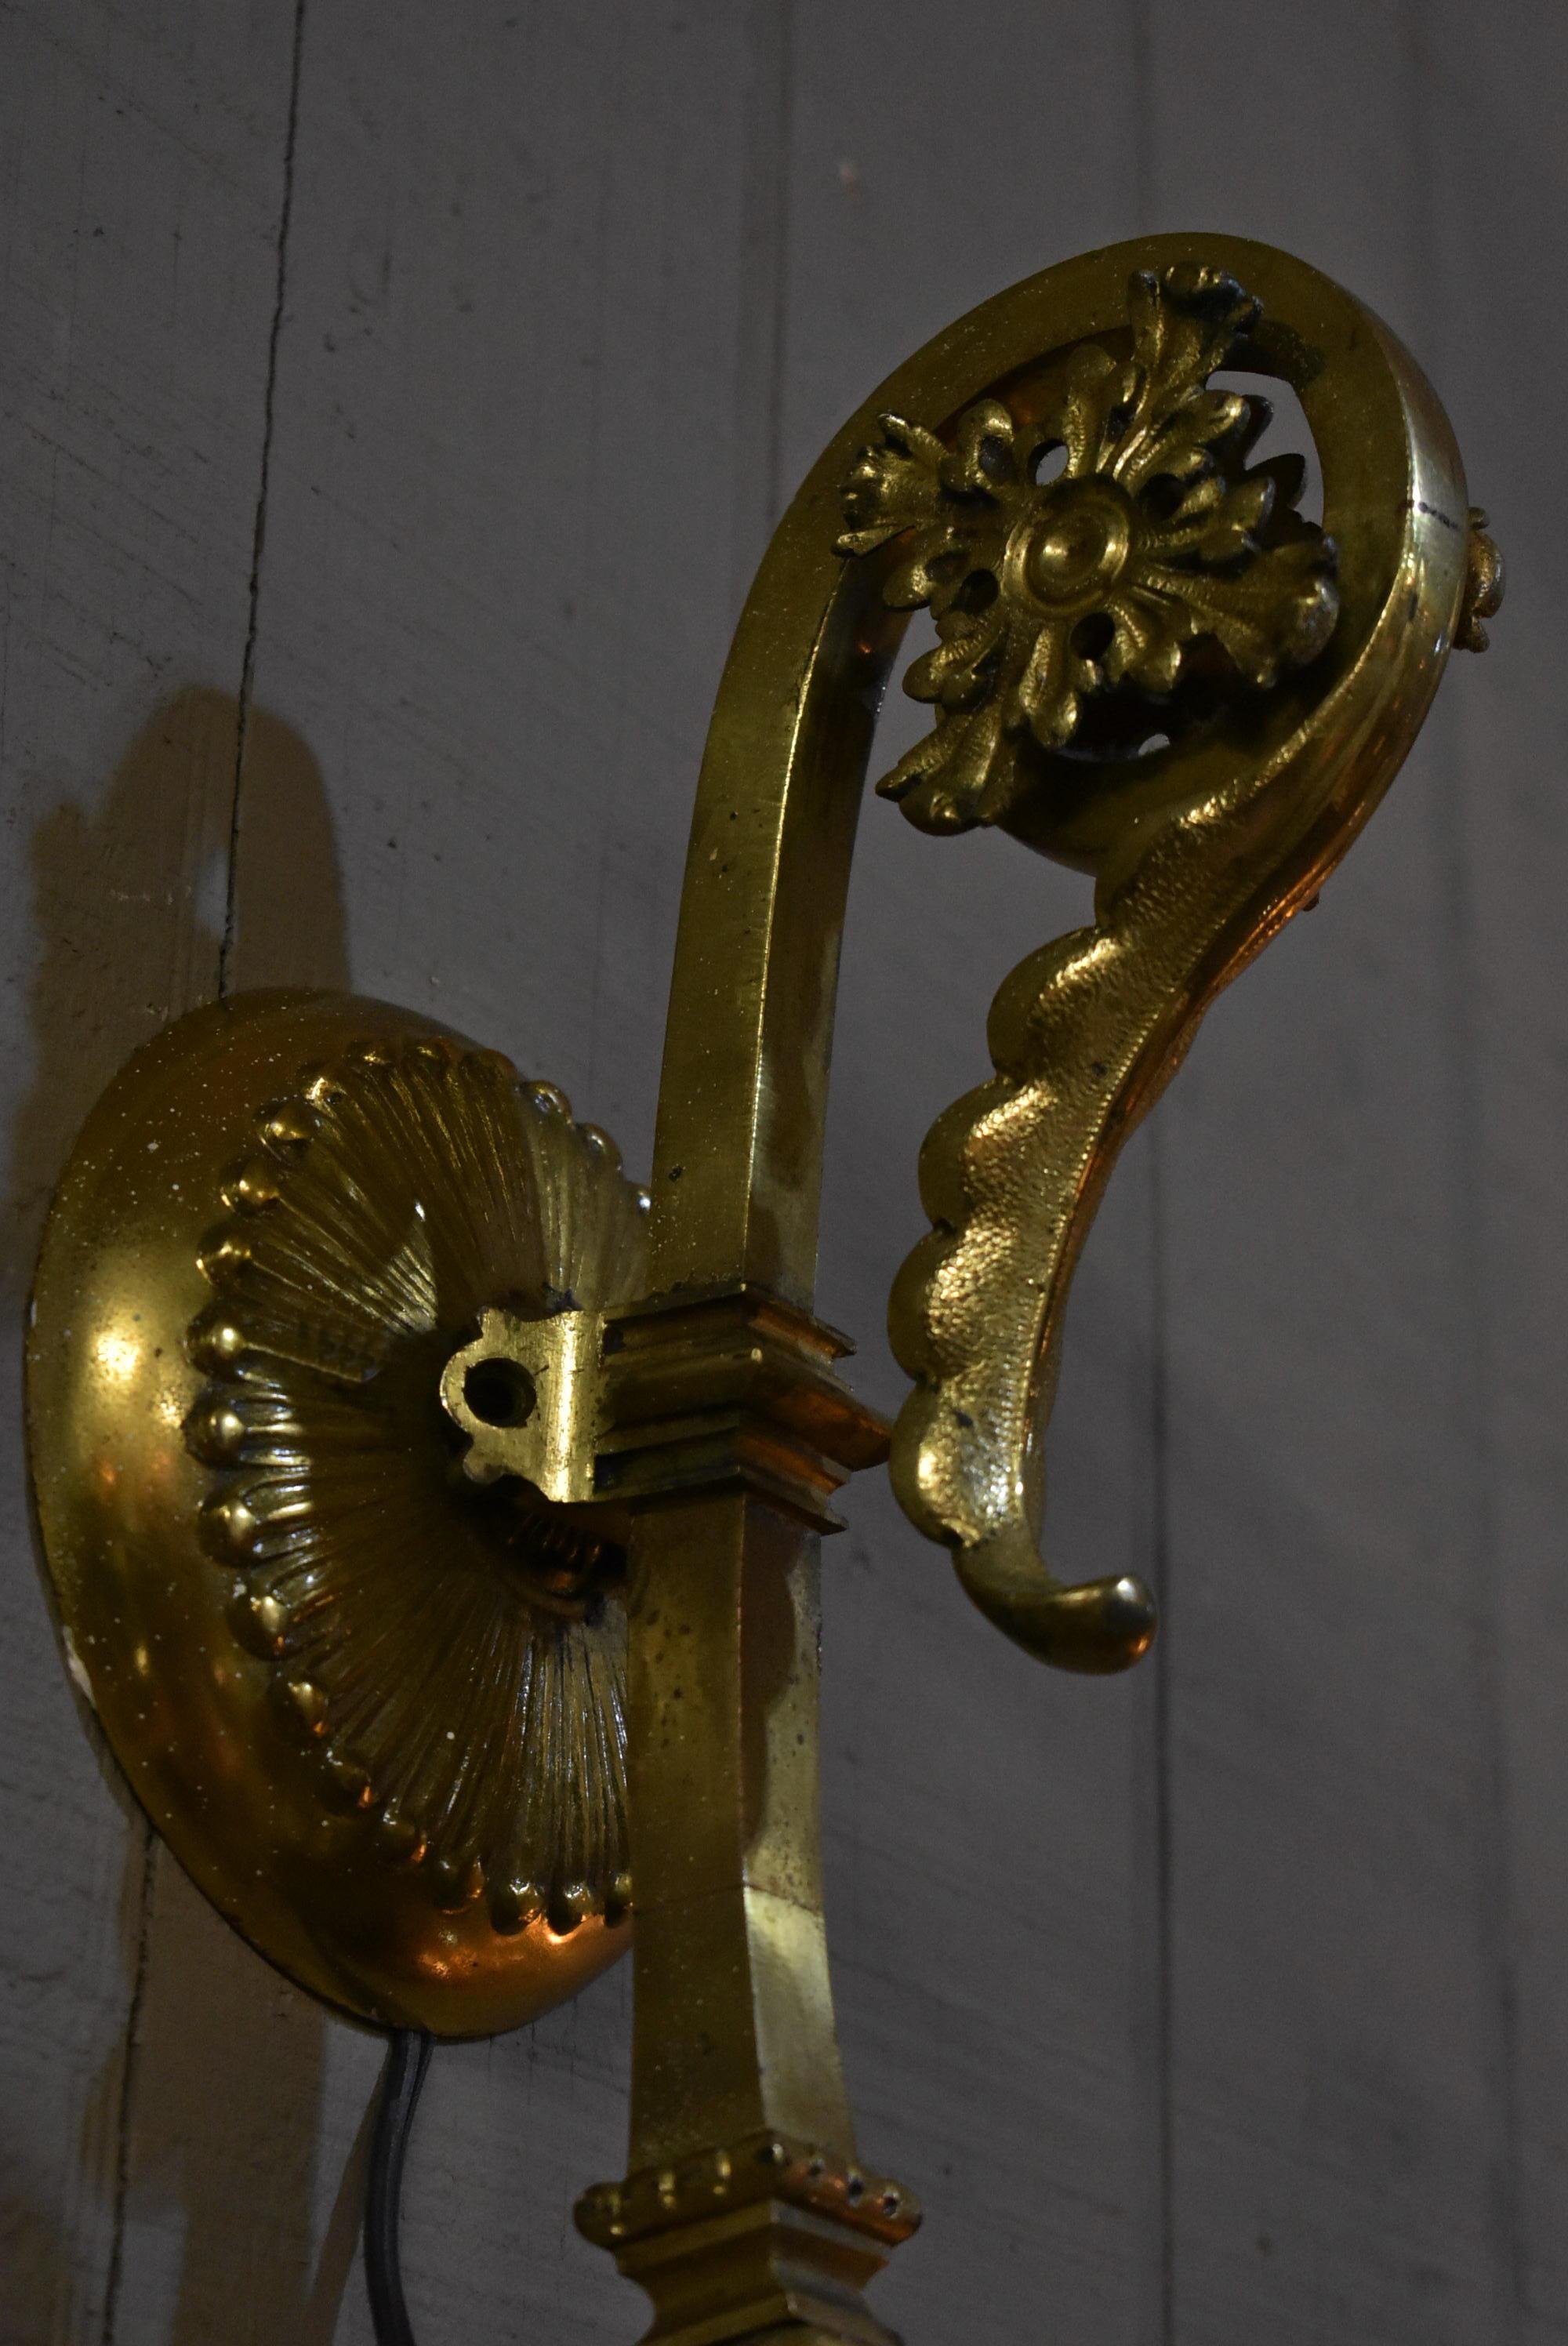 Pair of antique heavy brass ornate wall sconces. Grape design details on cut and polished astral shades.